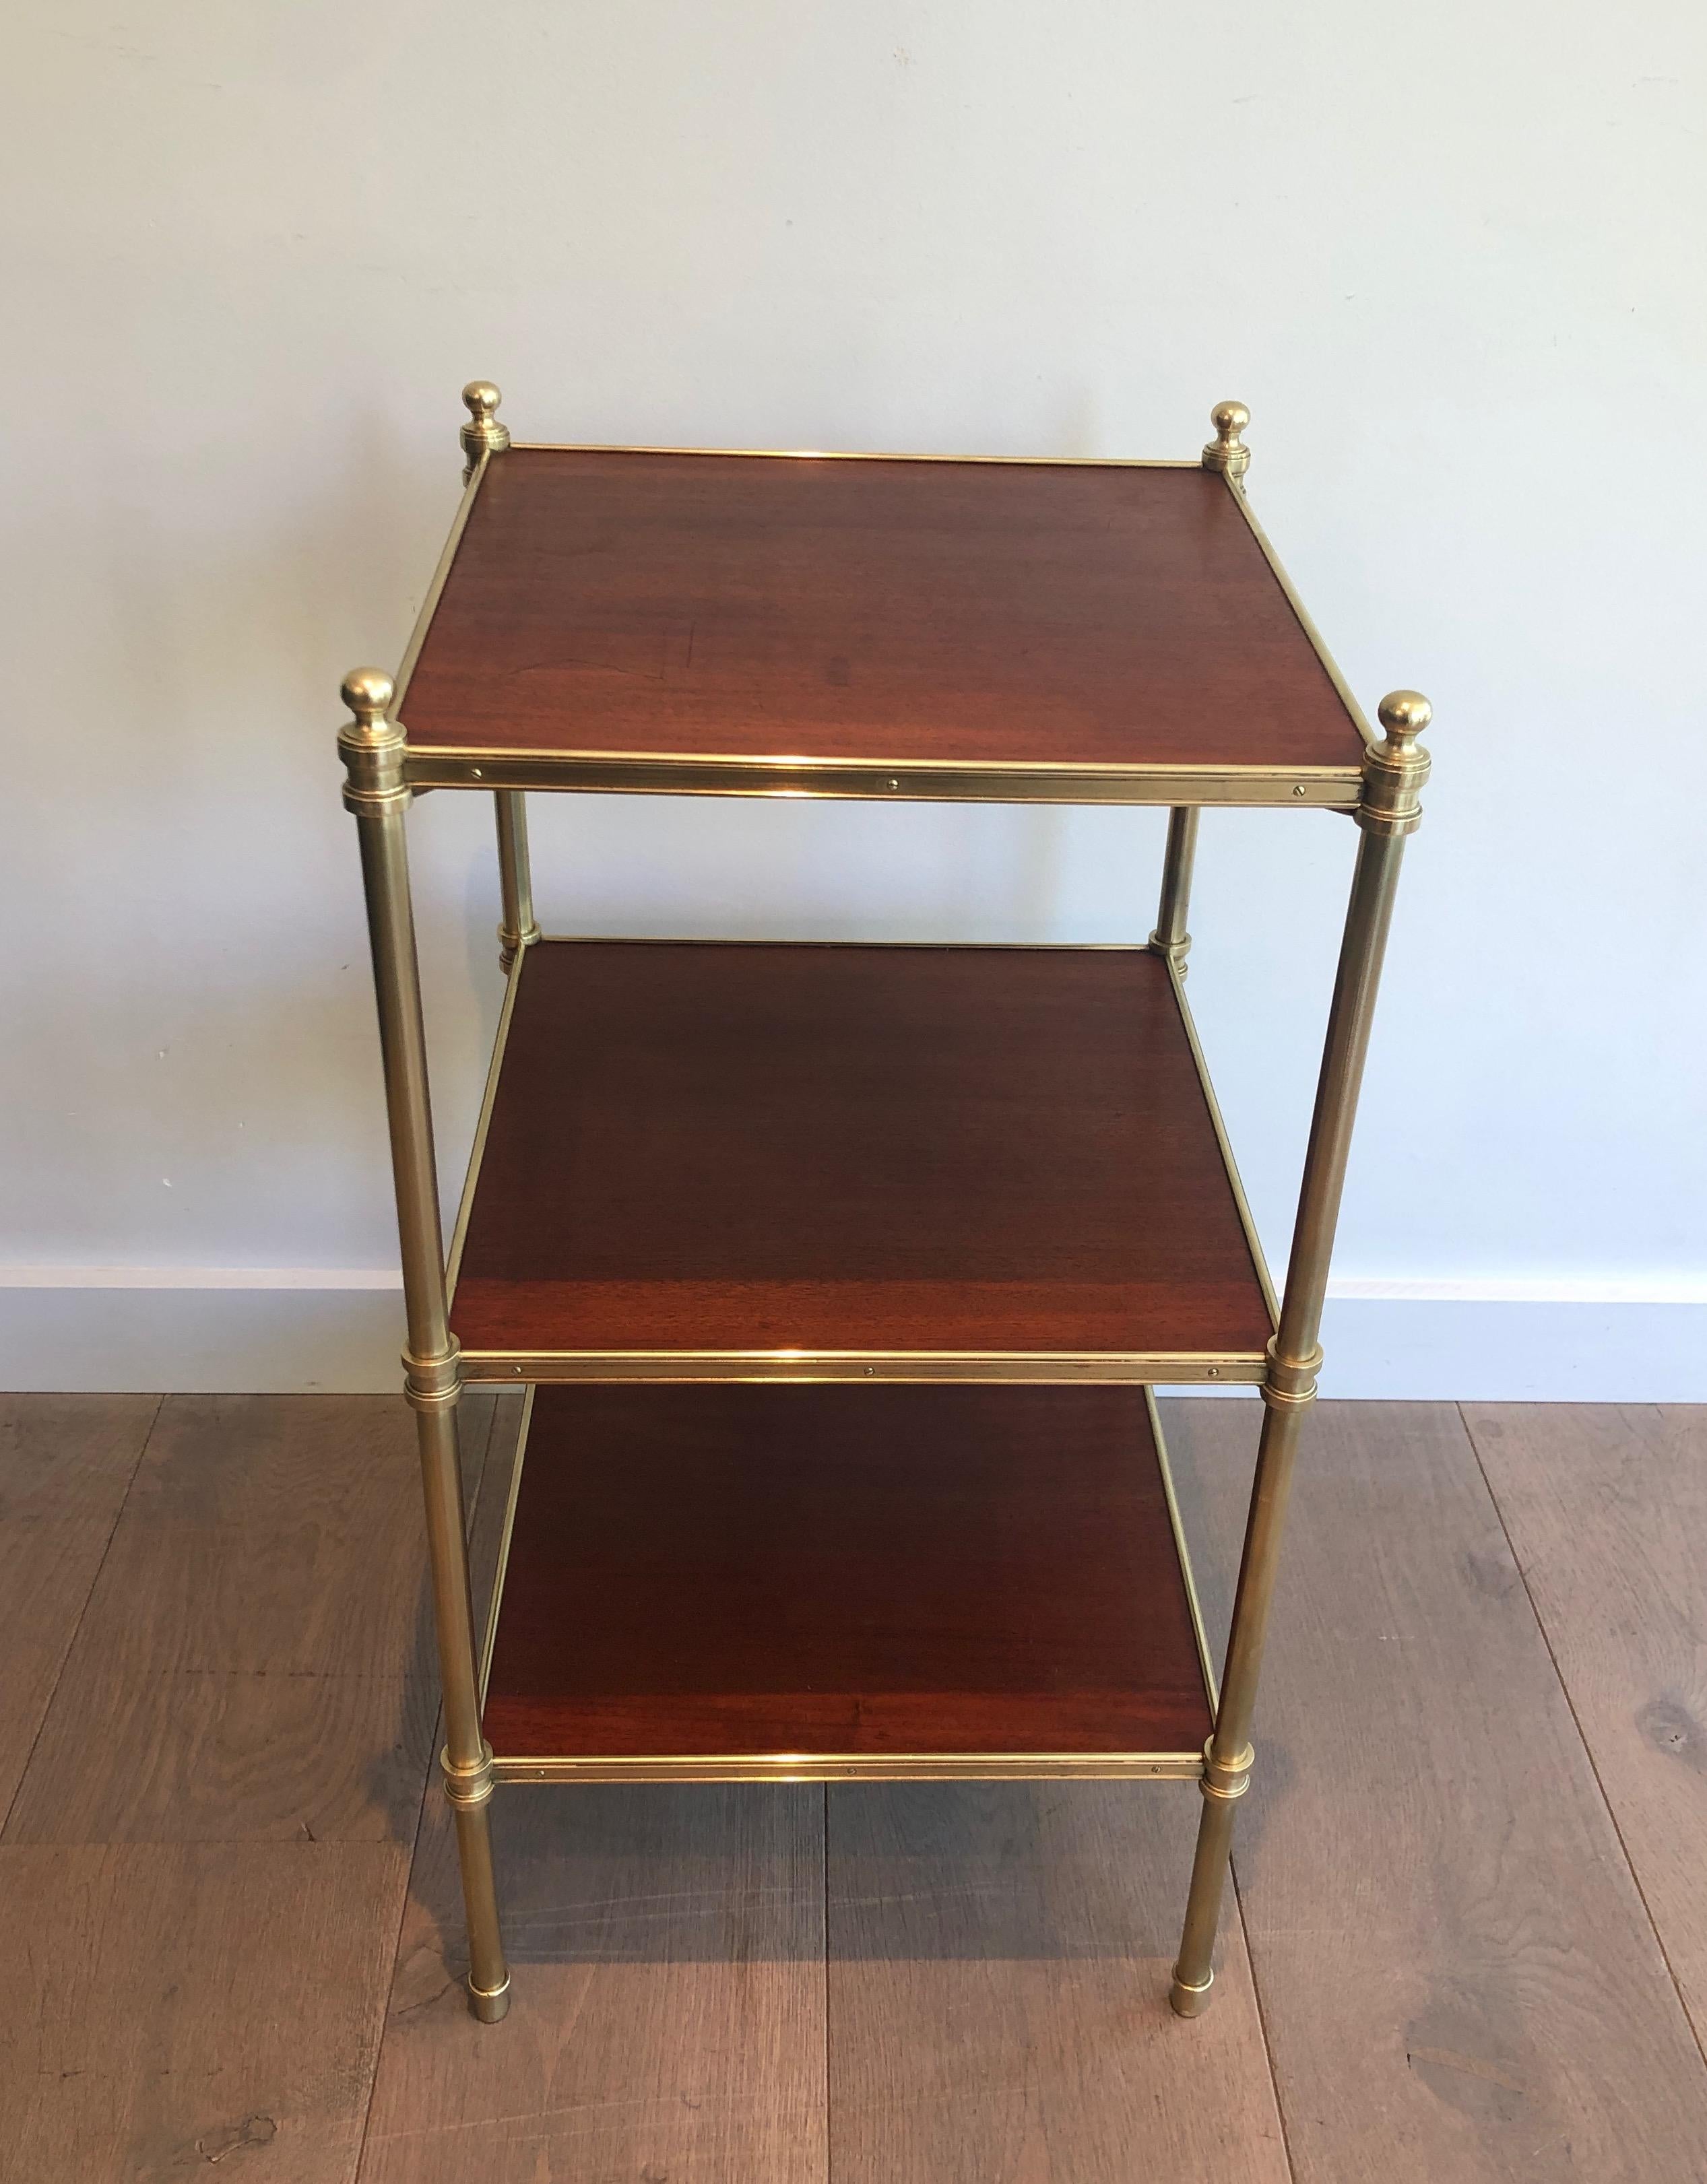 This neoclassical style 3 tiers side table is made of mahogany and brass. This is a French work by famous designer Maison Jansen, circa 1940.